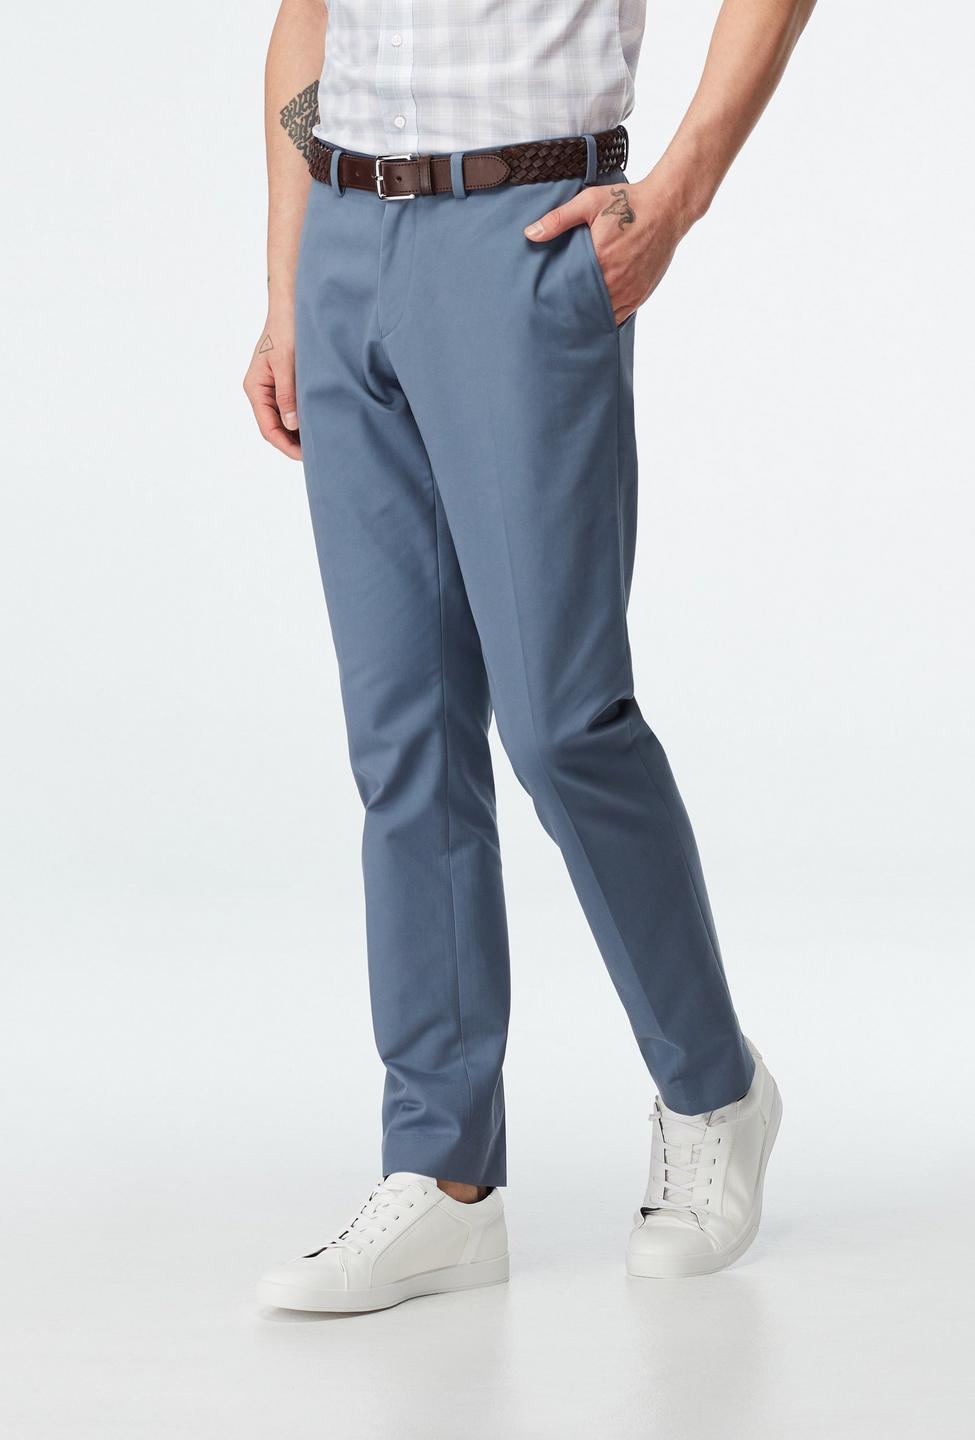 Blue pants - Halton Solid Design from Premium Indochino Collection